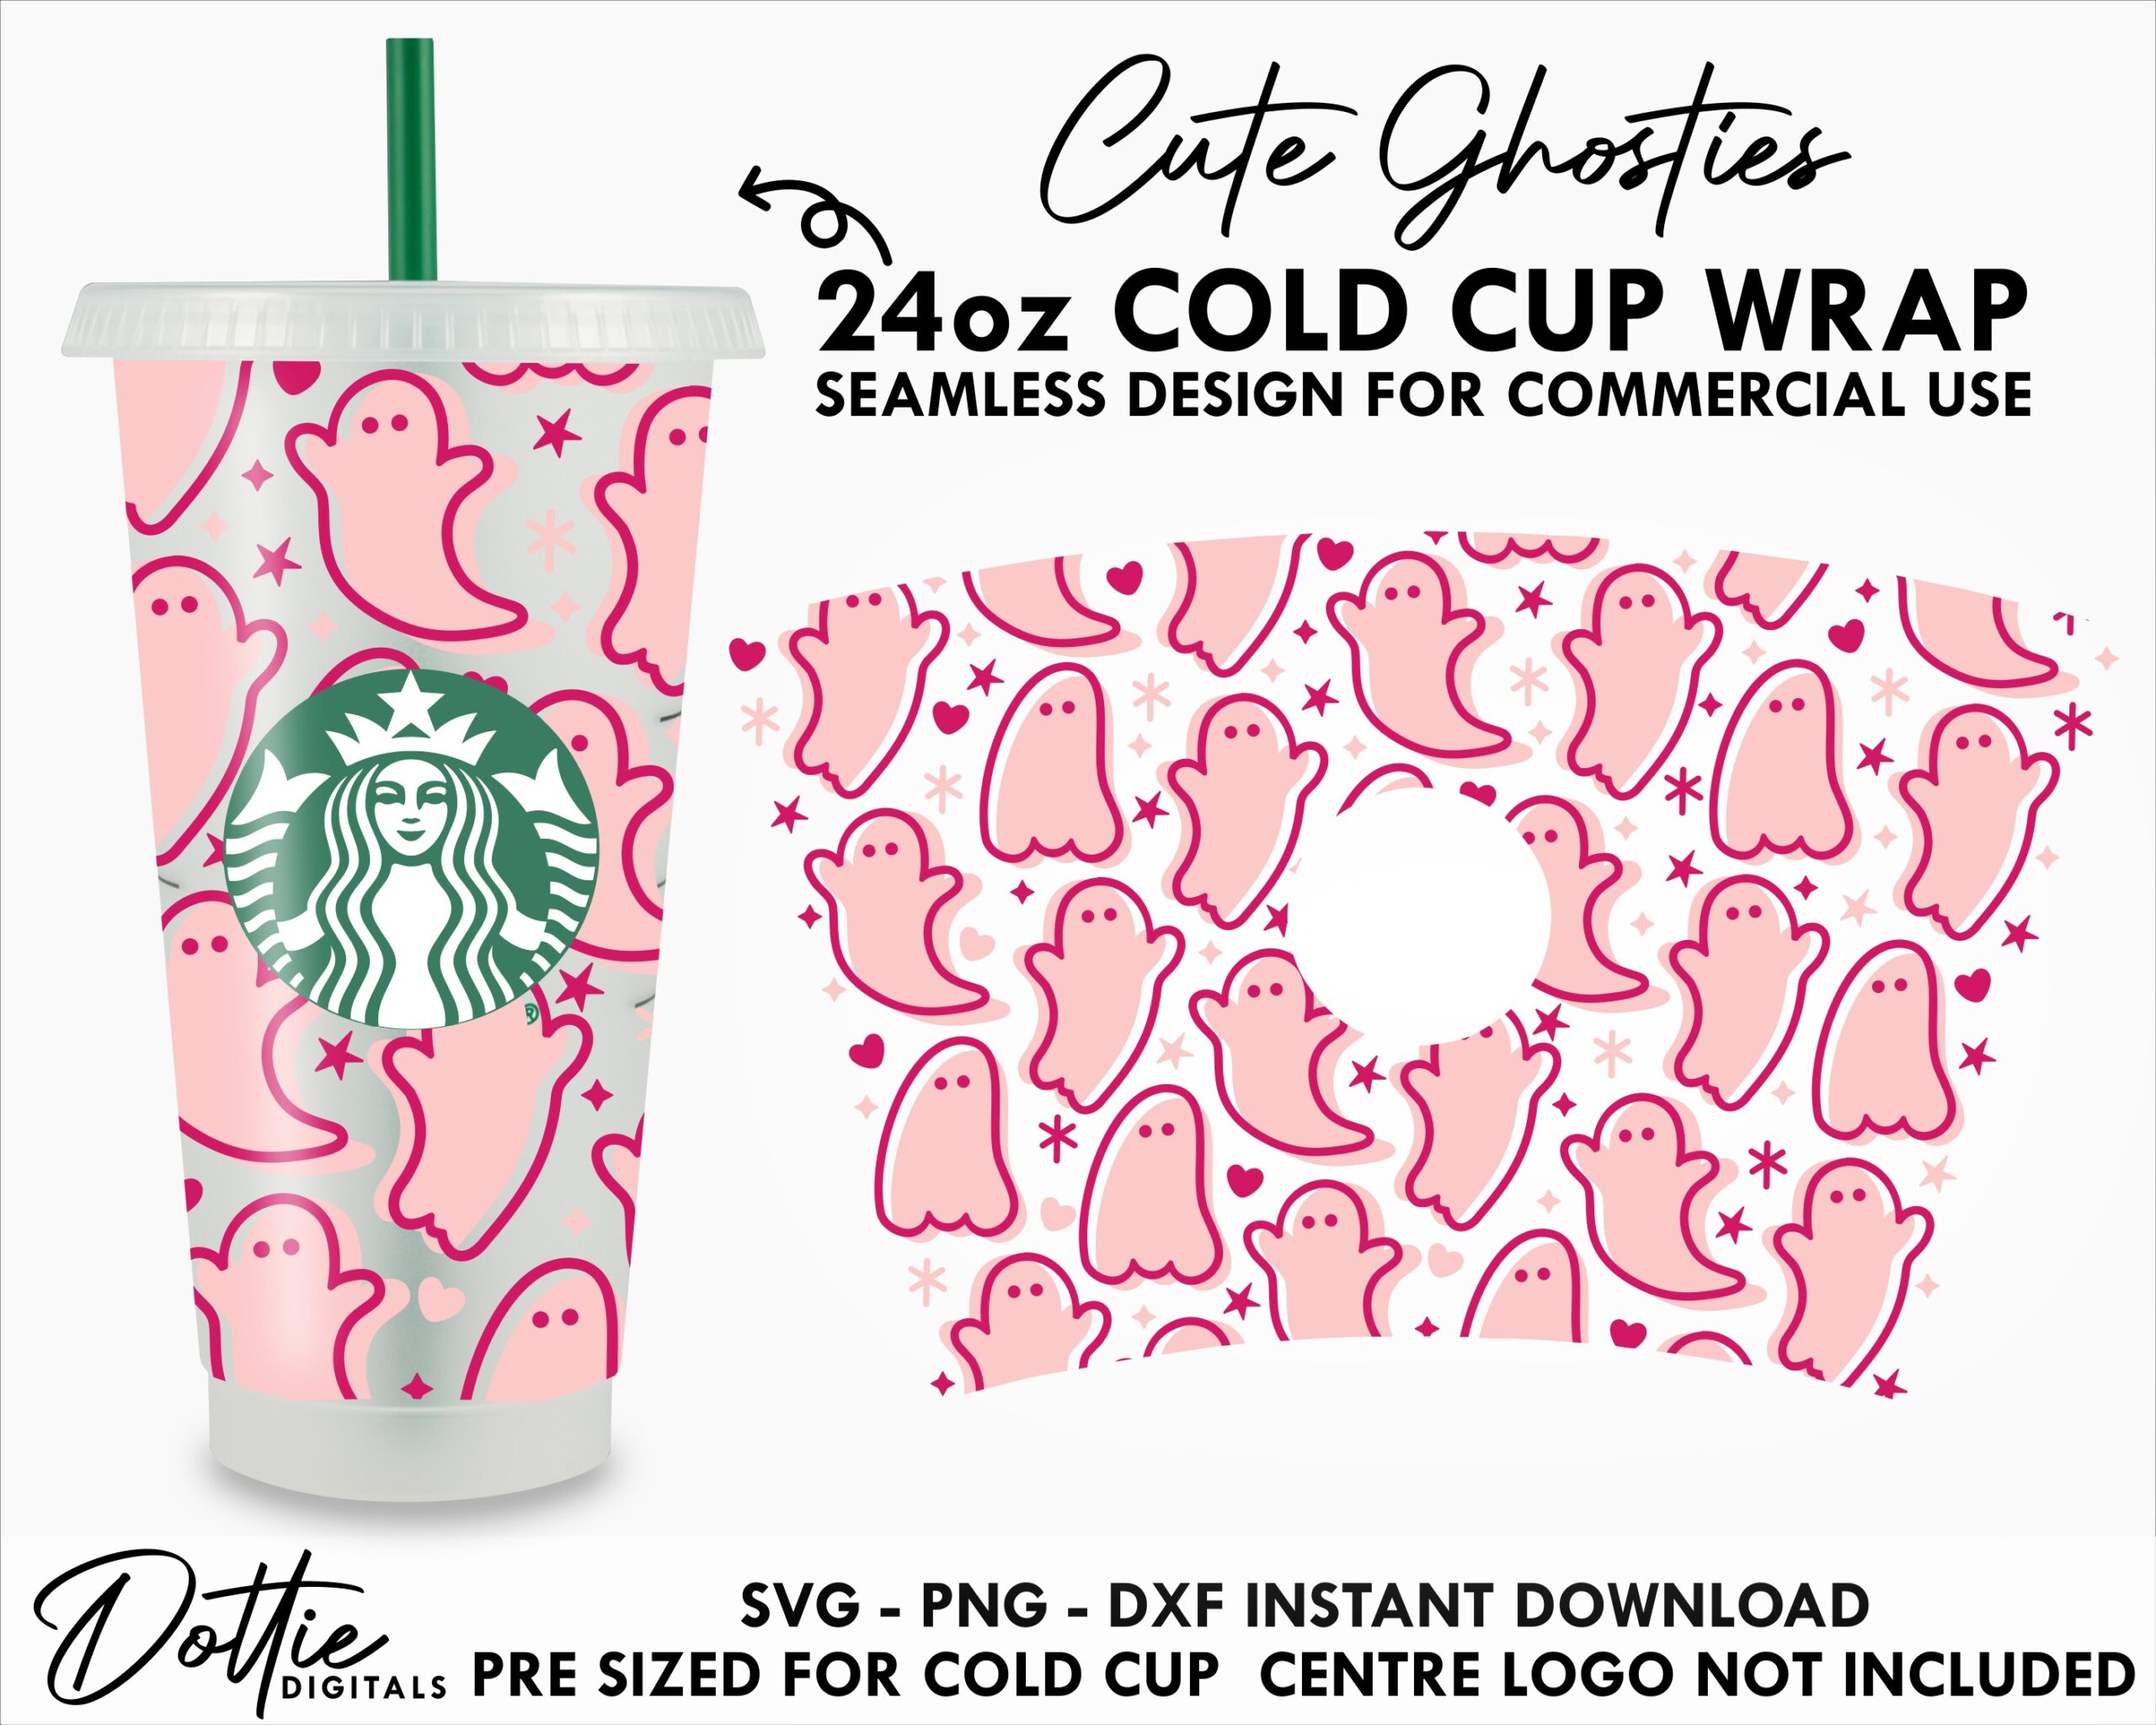 Dottie Digitals - Starbucks Cold Cup SVG PNG DXF Blood Drip Halloween  Cutting File 24oz Venti Cup Instant Digital Download Vampire